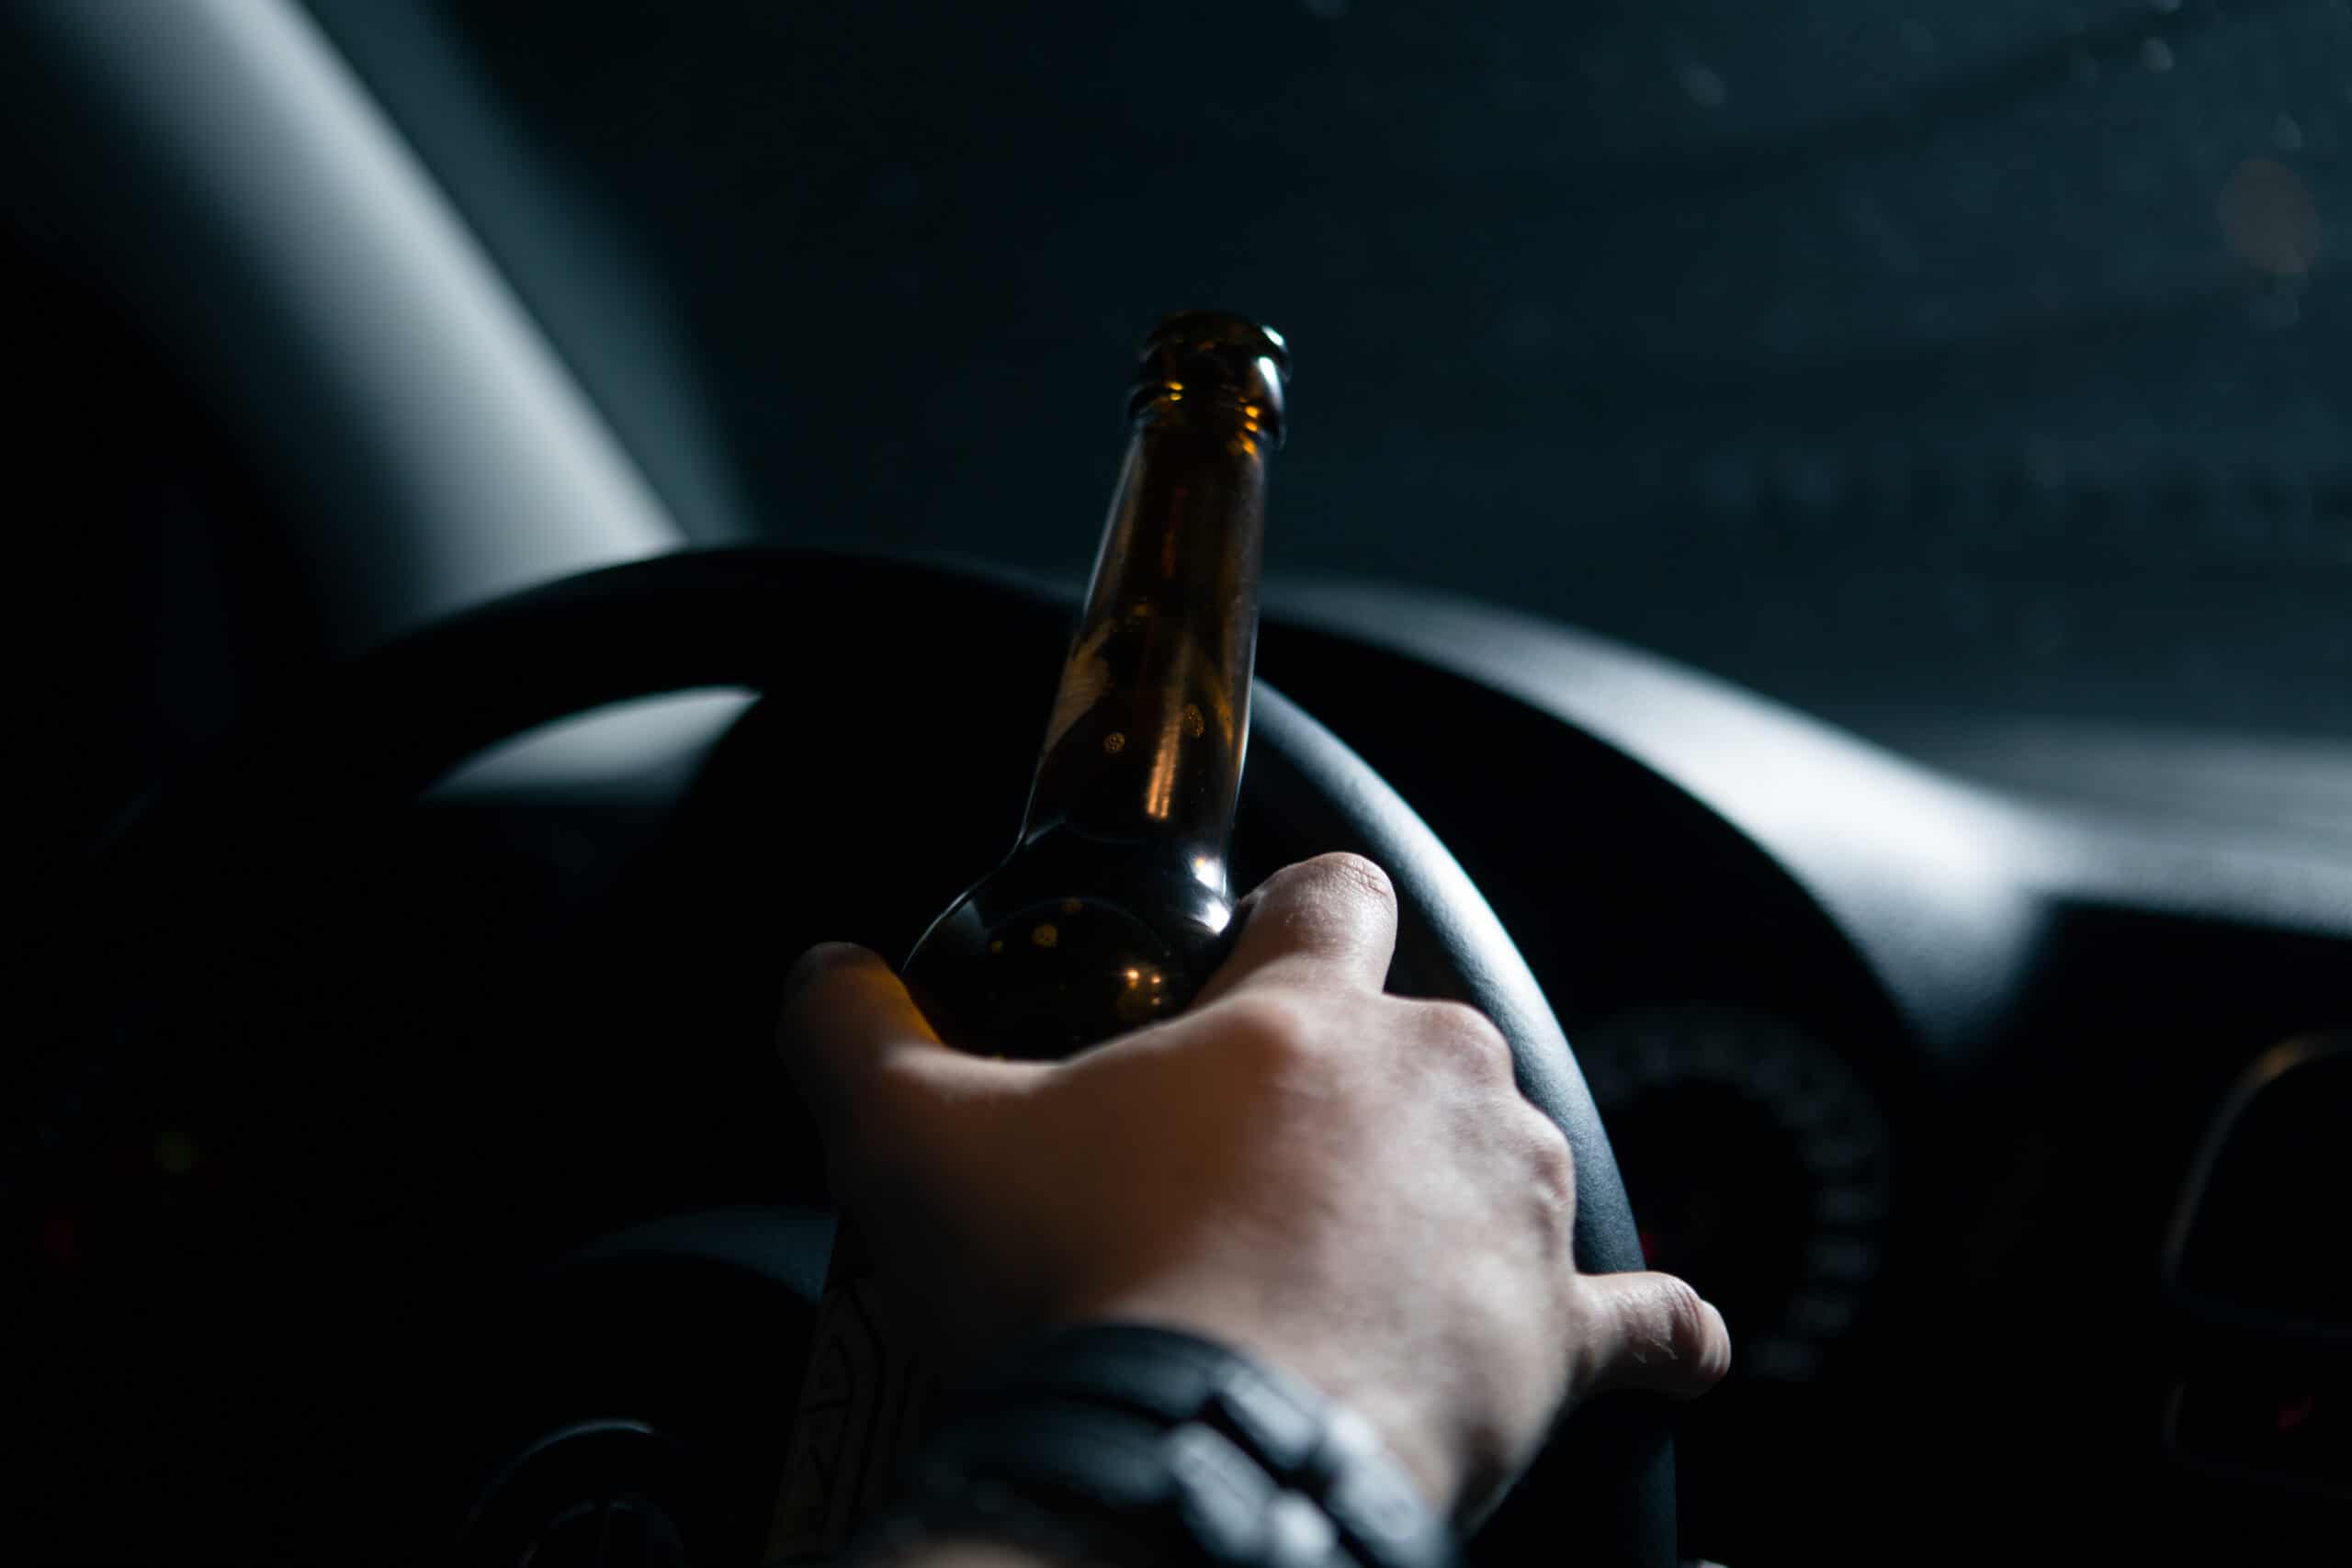 A driver behind the wheel with a beer bottle, suggesting drunk driving.